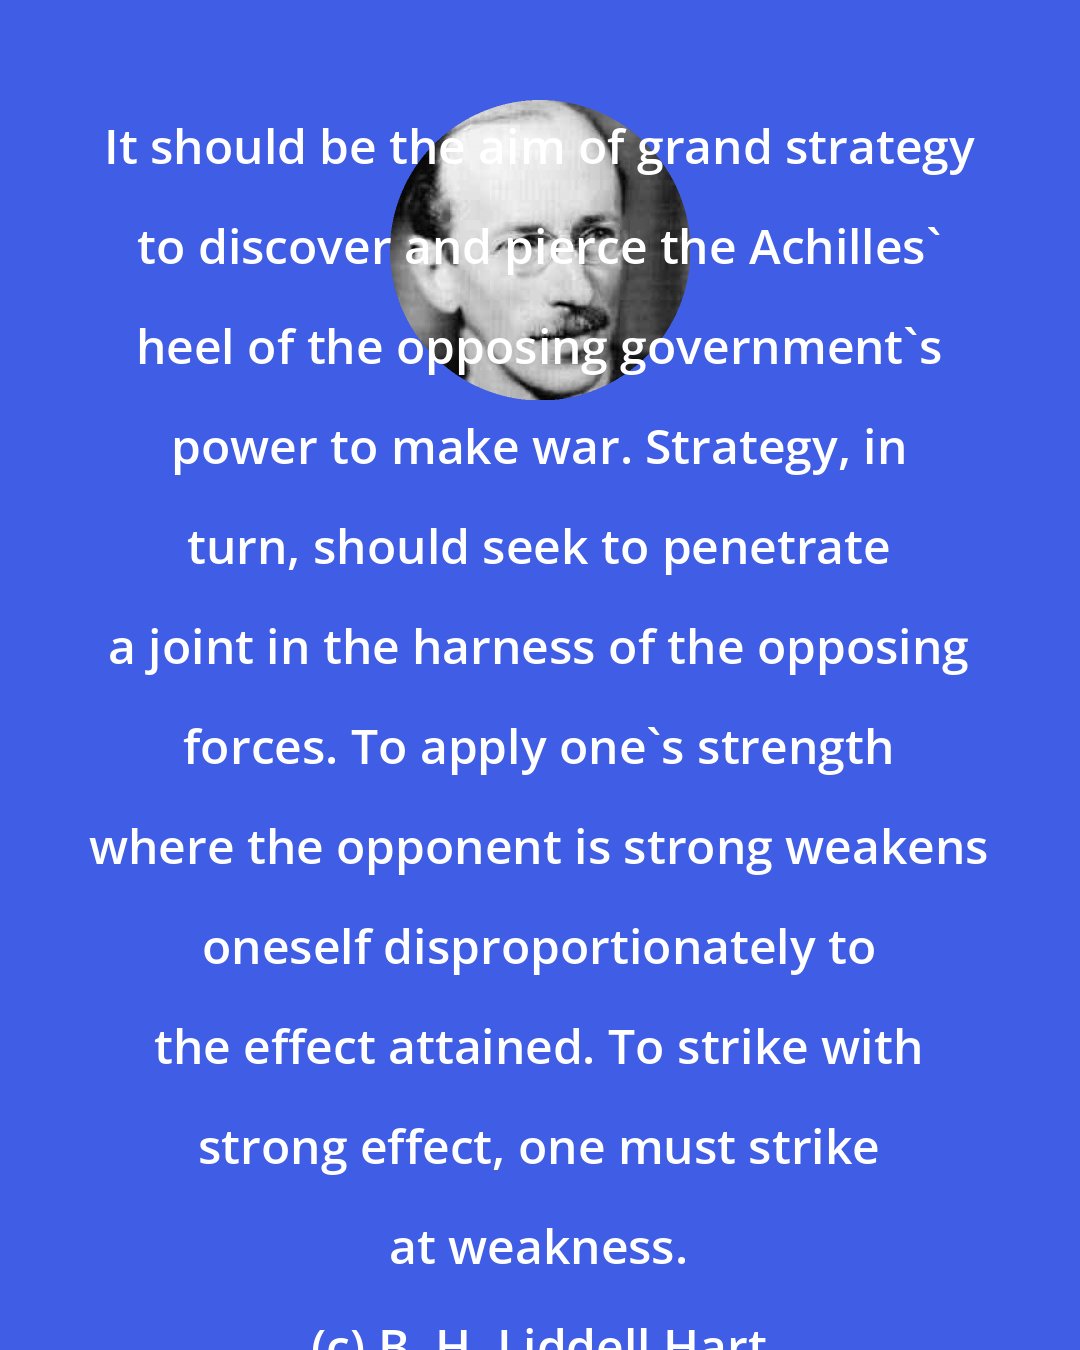 B. H. Liddell Hart: It should be the aim of grand strategy to discover and pierce the Achilles' heel of the opposing government's power to make war. Strategy, in turn, should seek to penetrate a joint in the harness of the opposing forces. To apply one's strength where the opponent is strong weakens oneself disproportionately to the effect attained. To strike with strong effect, one must strike at weakness.